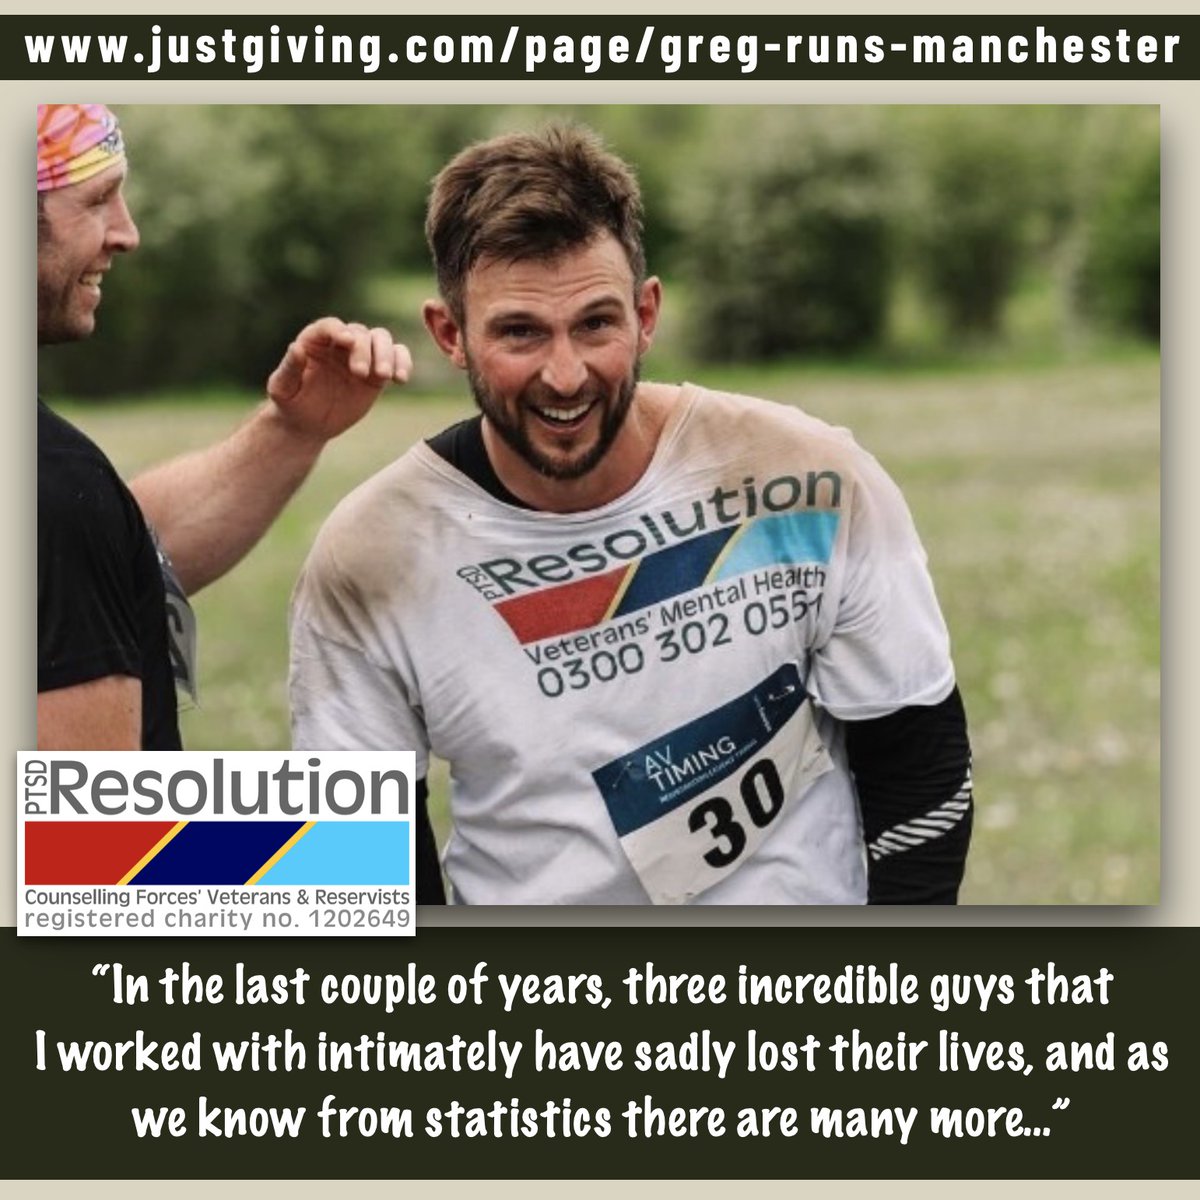 Our very own Trustee Greg Vosper will be running the #ManchesterMarathon in less than 2 weeks - 14th April - all to raise much needed funds for our UK Veterans, Reservists & families! 🏃‍♂️🏃‍♂️🏃‍♂️ Fancy supporting Greg & #PTSDResolution? ➡️ justgiving.com/page/greg-runs… Go Greg! 💪🙏